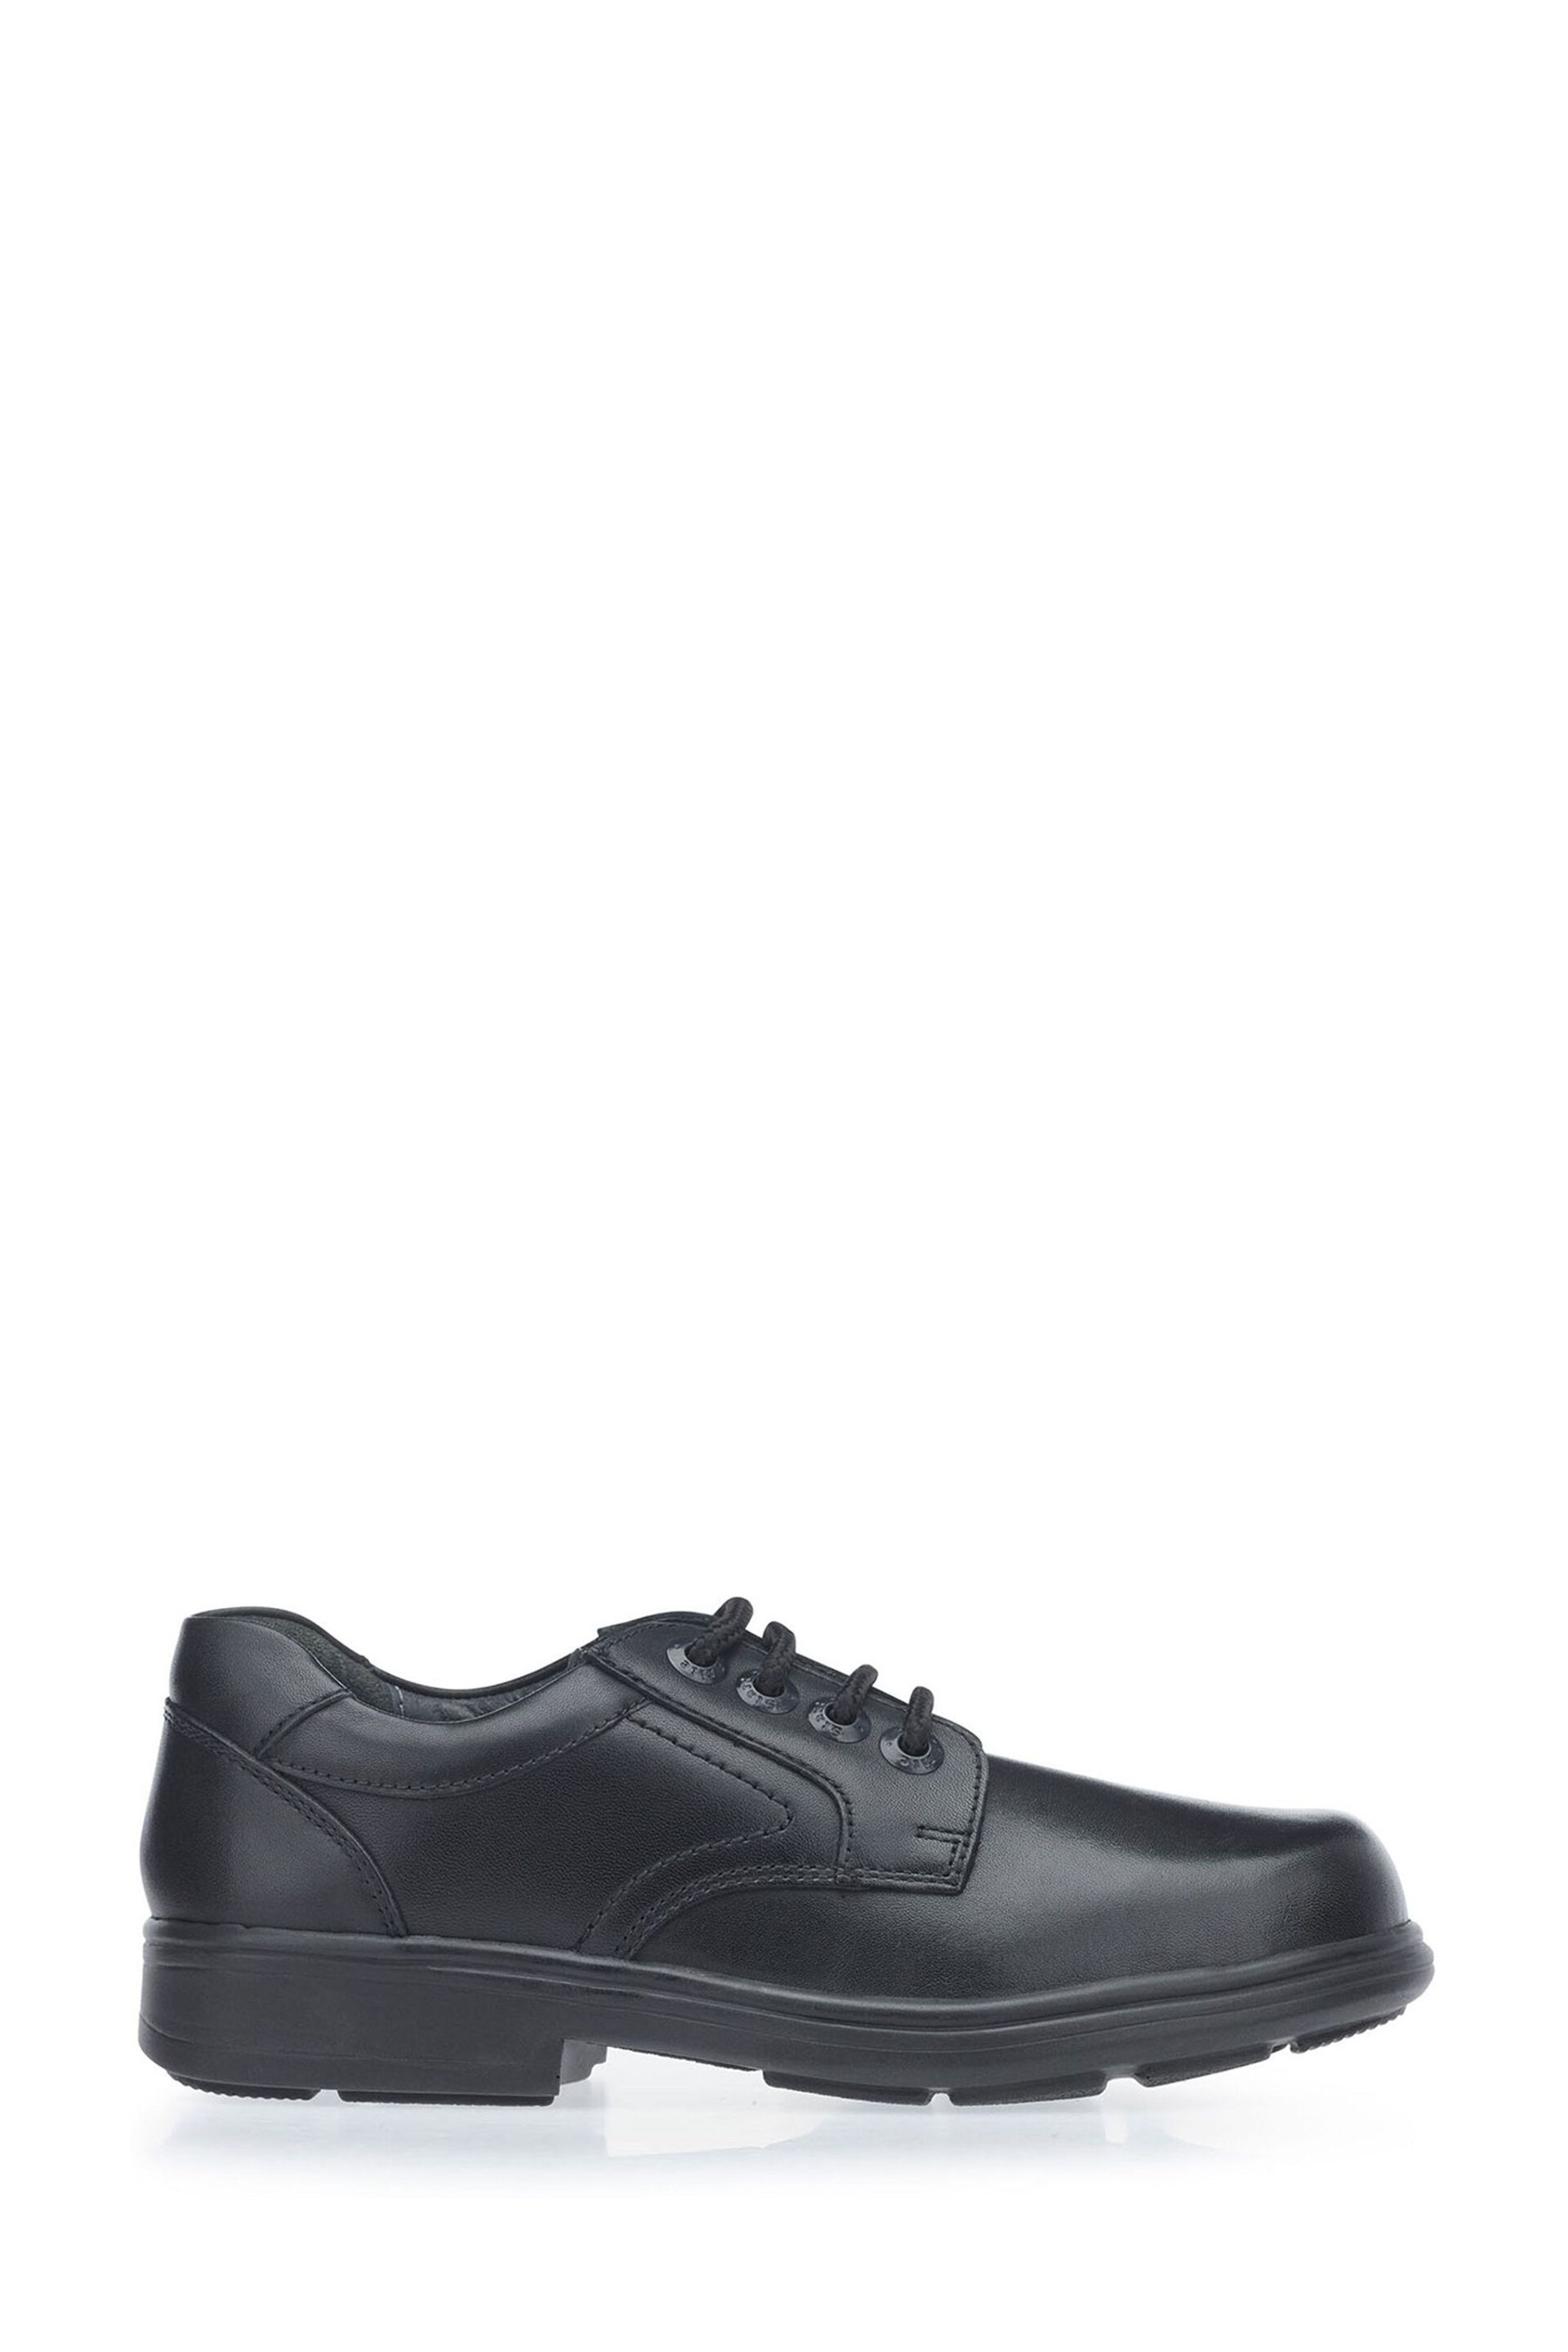 Start Rite Isaac Black Vegan Lace Up School Shoes F Fit - Image 1 of 6